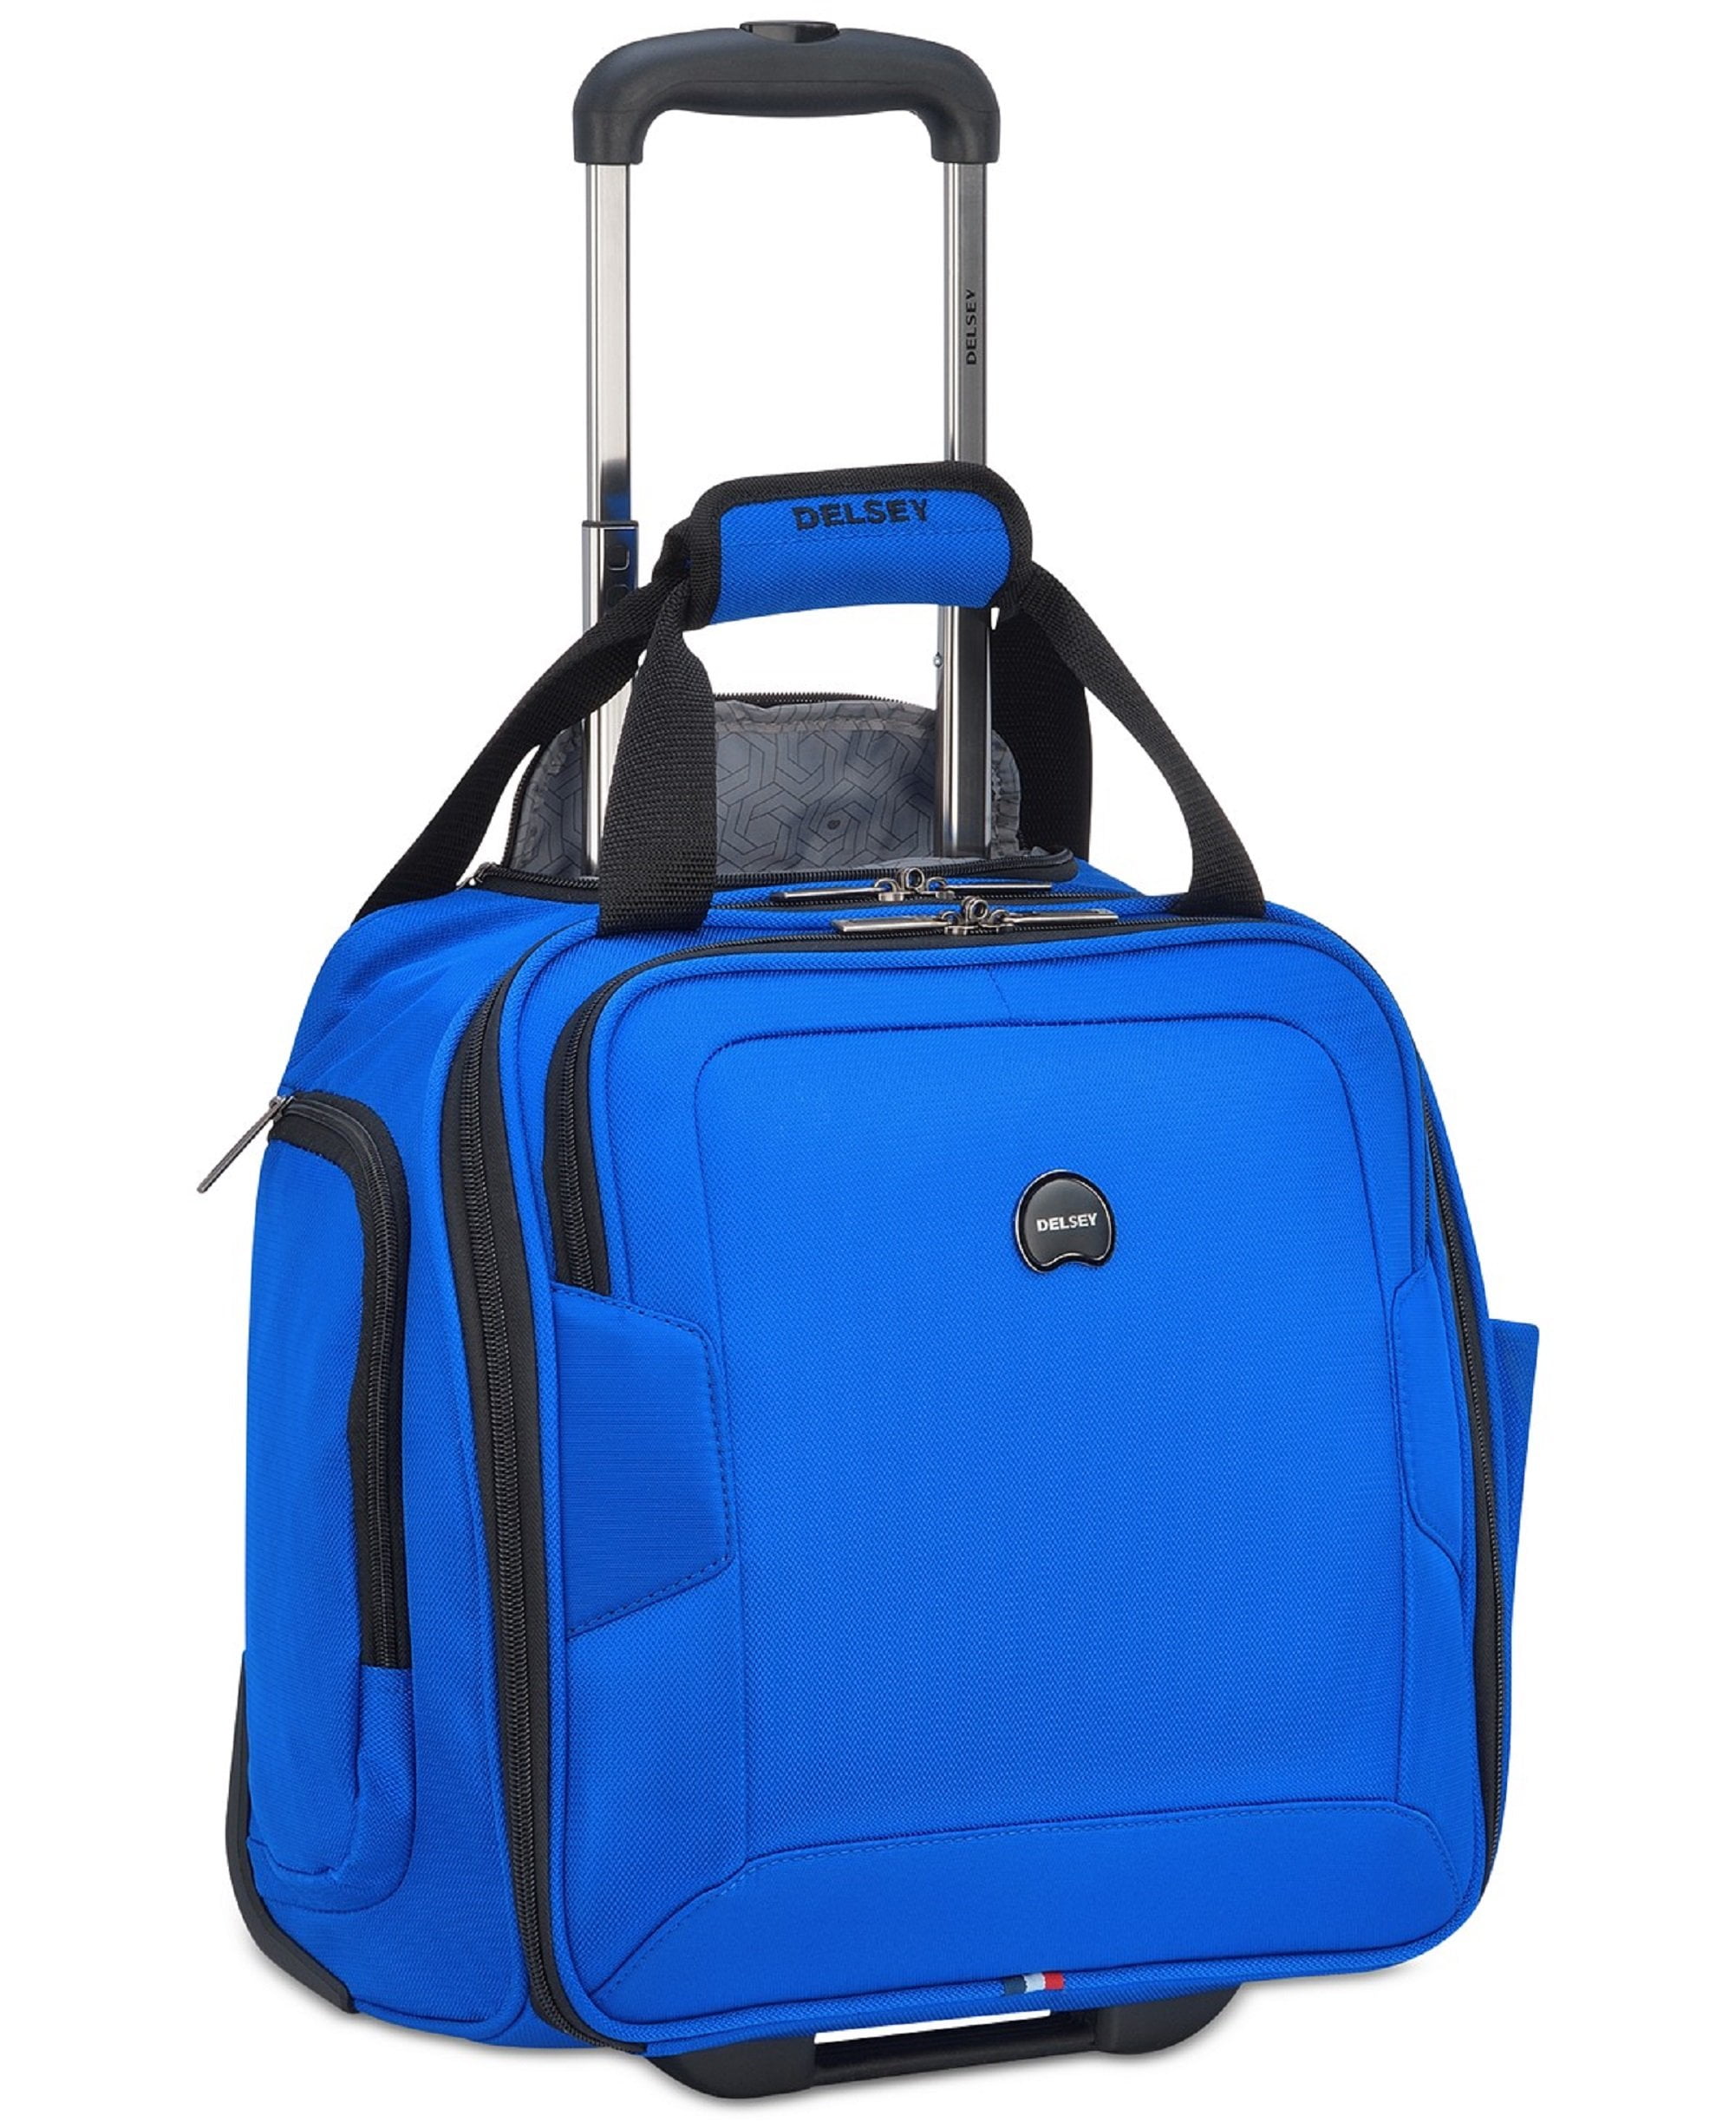 Delsey Opti Max Wheeled Under Seat Suitcase Carry-on Travel Tote Bag ...